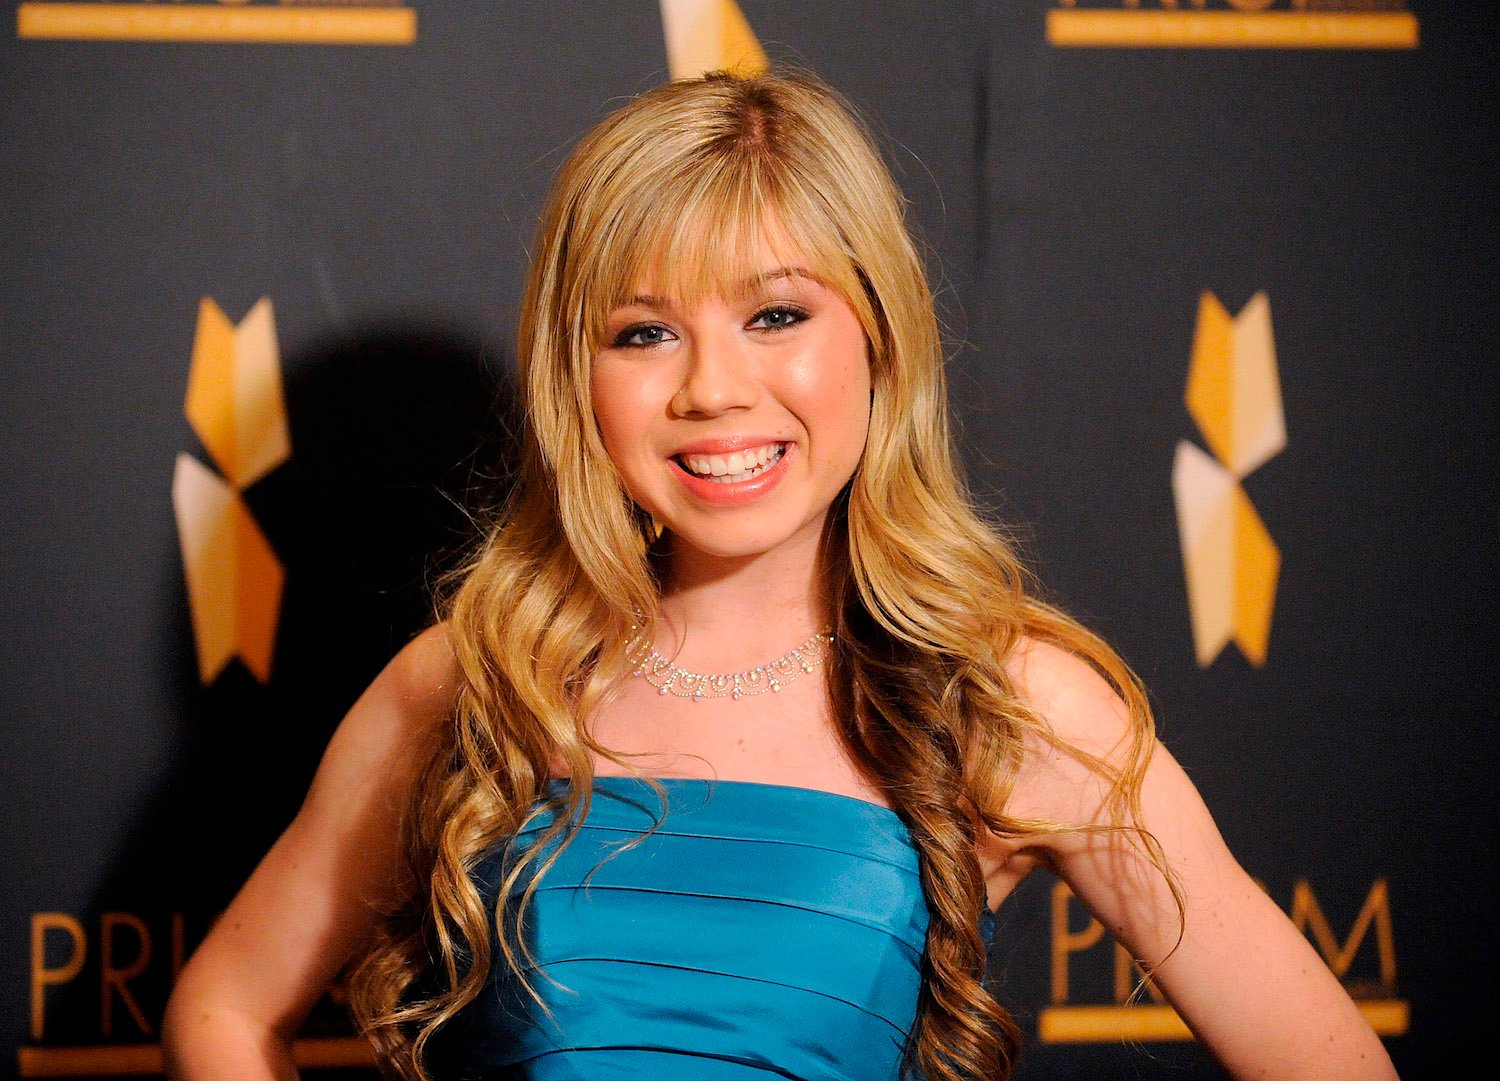 Jennette McCurdy attends The 2009 PRISM Awards